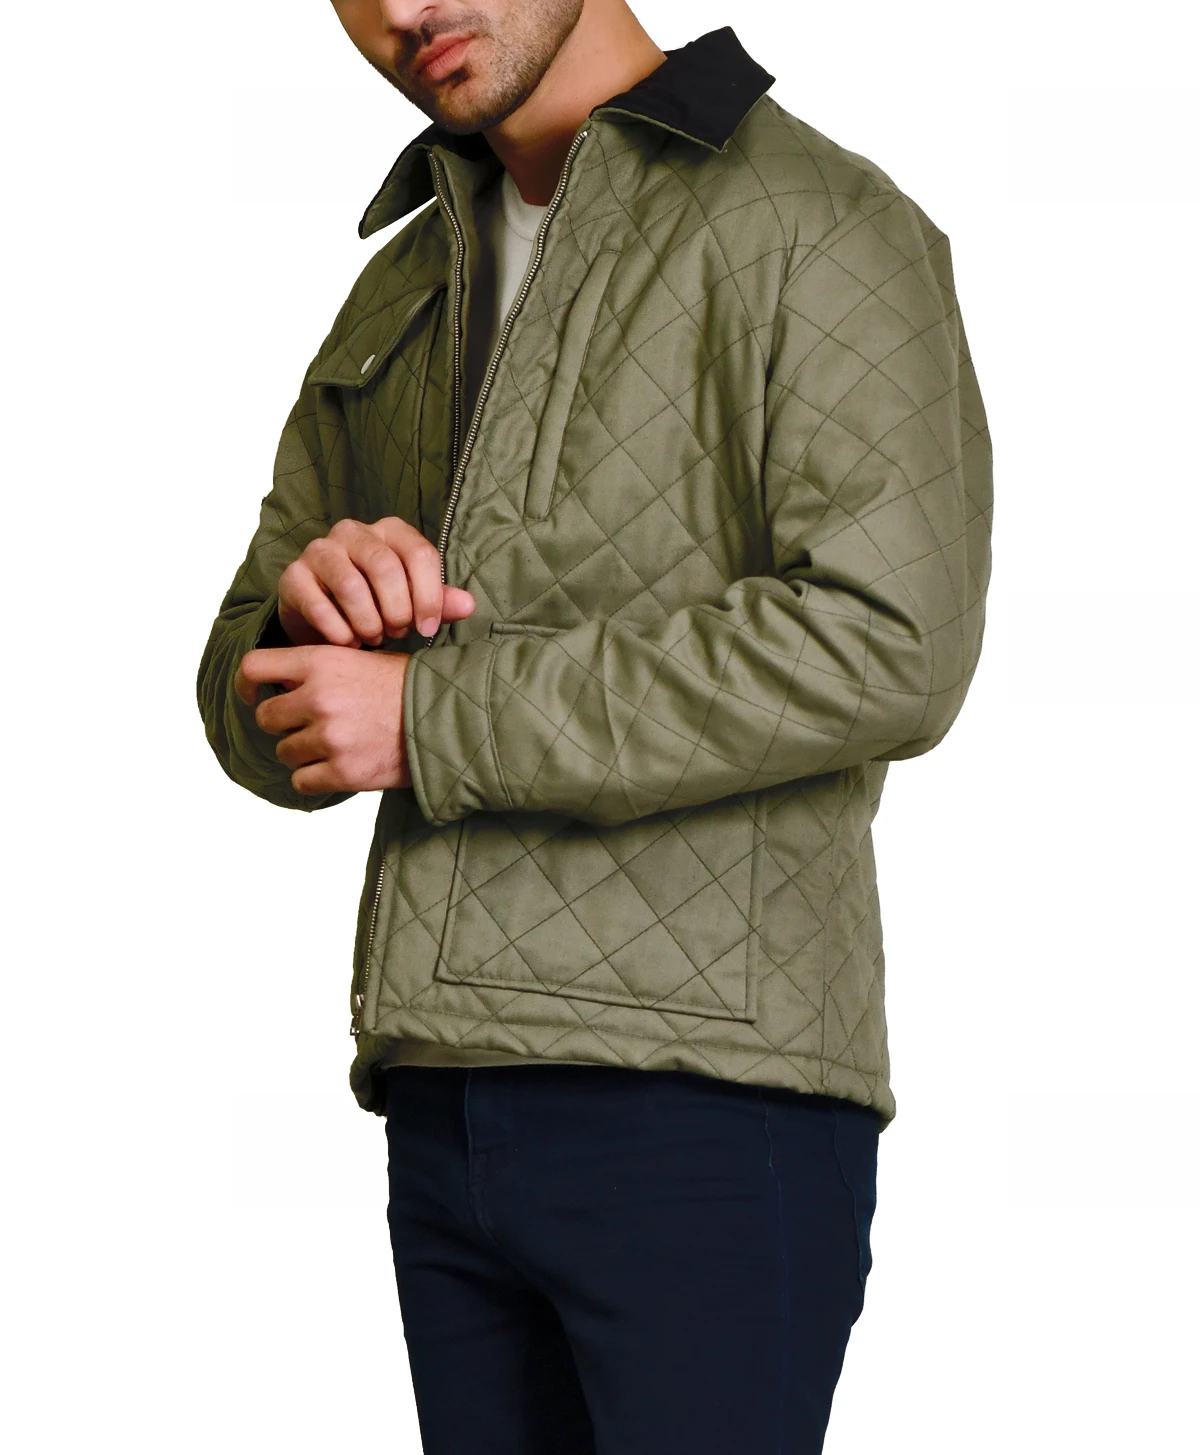 British Jackets Yellowstone S04 John Dutton Green Quilted Jacket | Kevin Costner Yellowstone Green Quilted Cotton Jacket